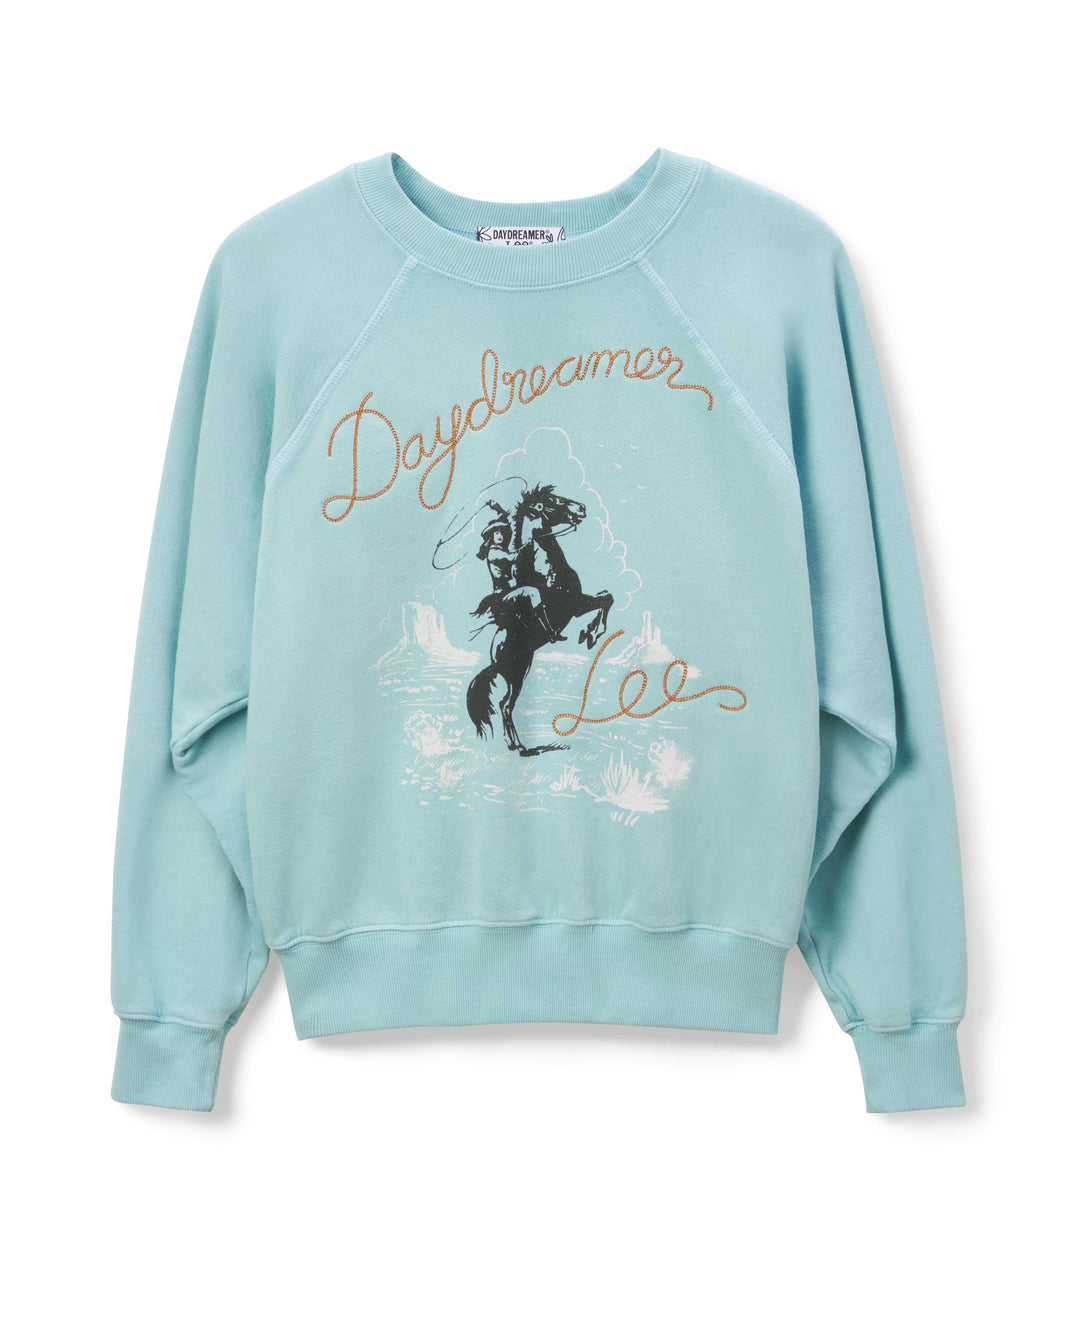 DAYDREAMER X LEE MONUMENT RAGLAN CREW-ICY MOON - Kingfisher Road - Online Boutique